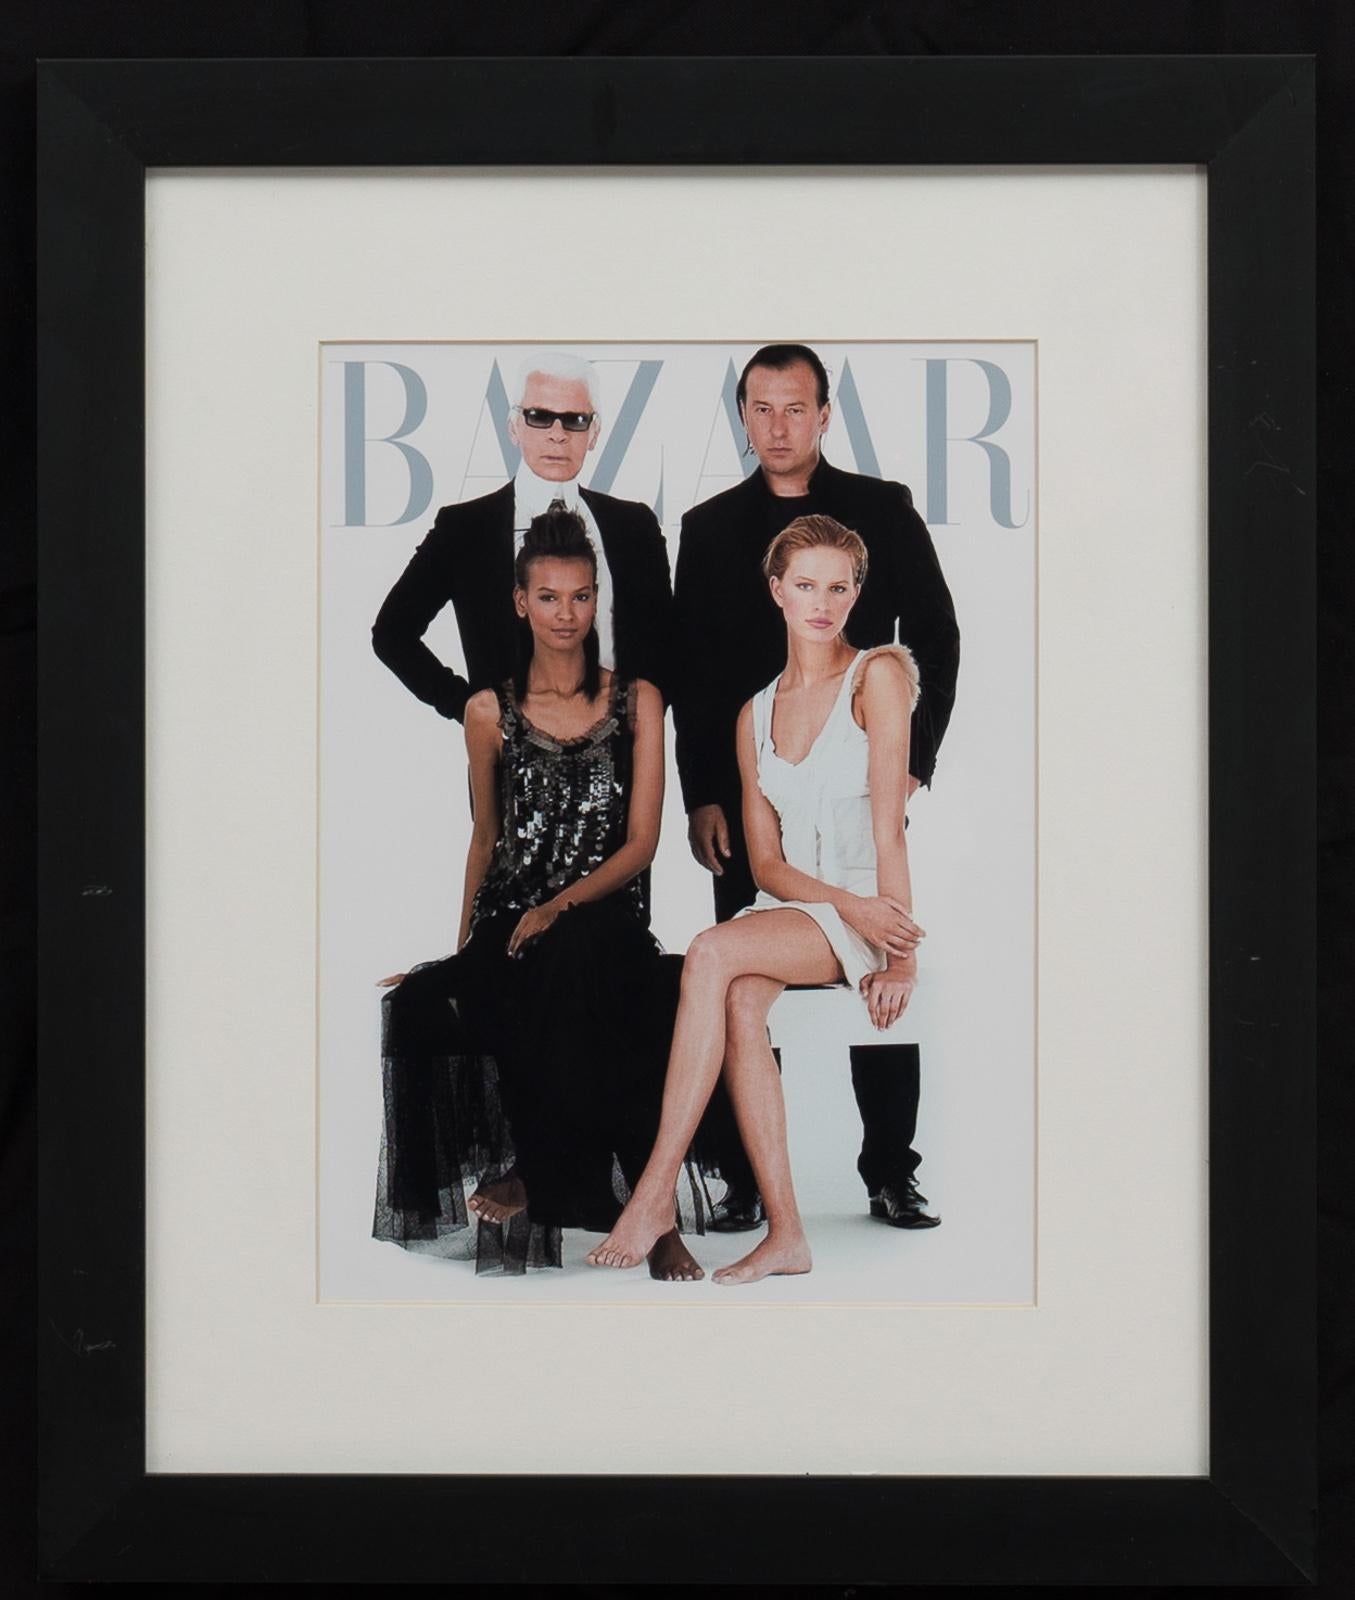 Original colour photograph of Karl Lagerfeld, Liya Kebede, Karolína Kurková & an unidentified male, a design for the cover of Bazaar magazine - it's not clear whether this piece was ever used for a Bazaar cover.
ex-collection Eric Wright -